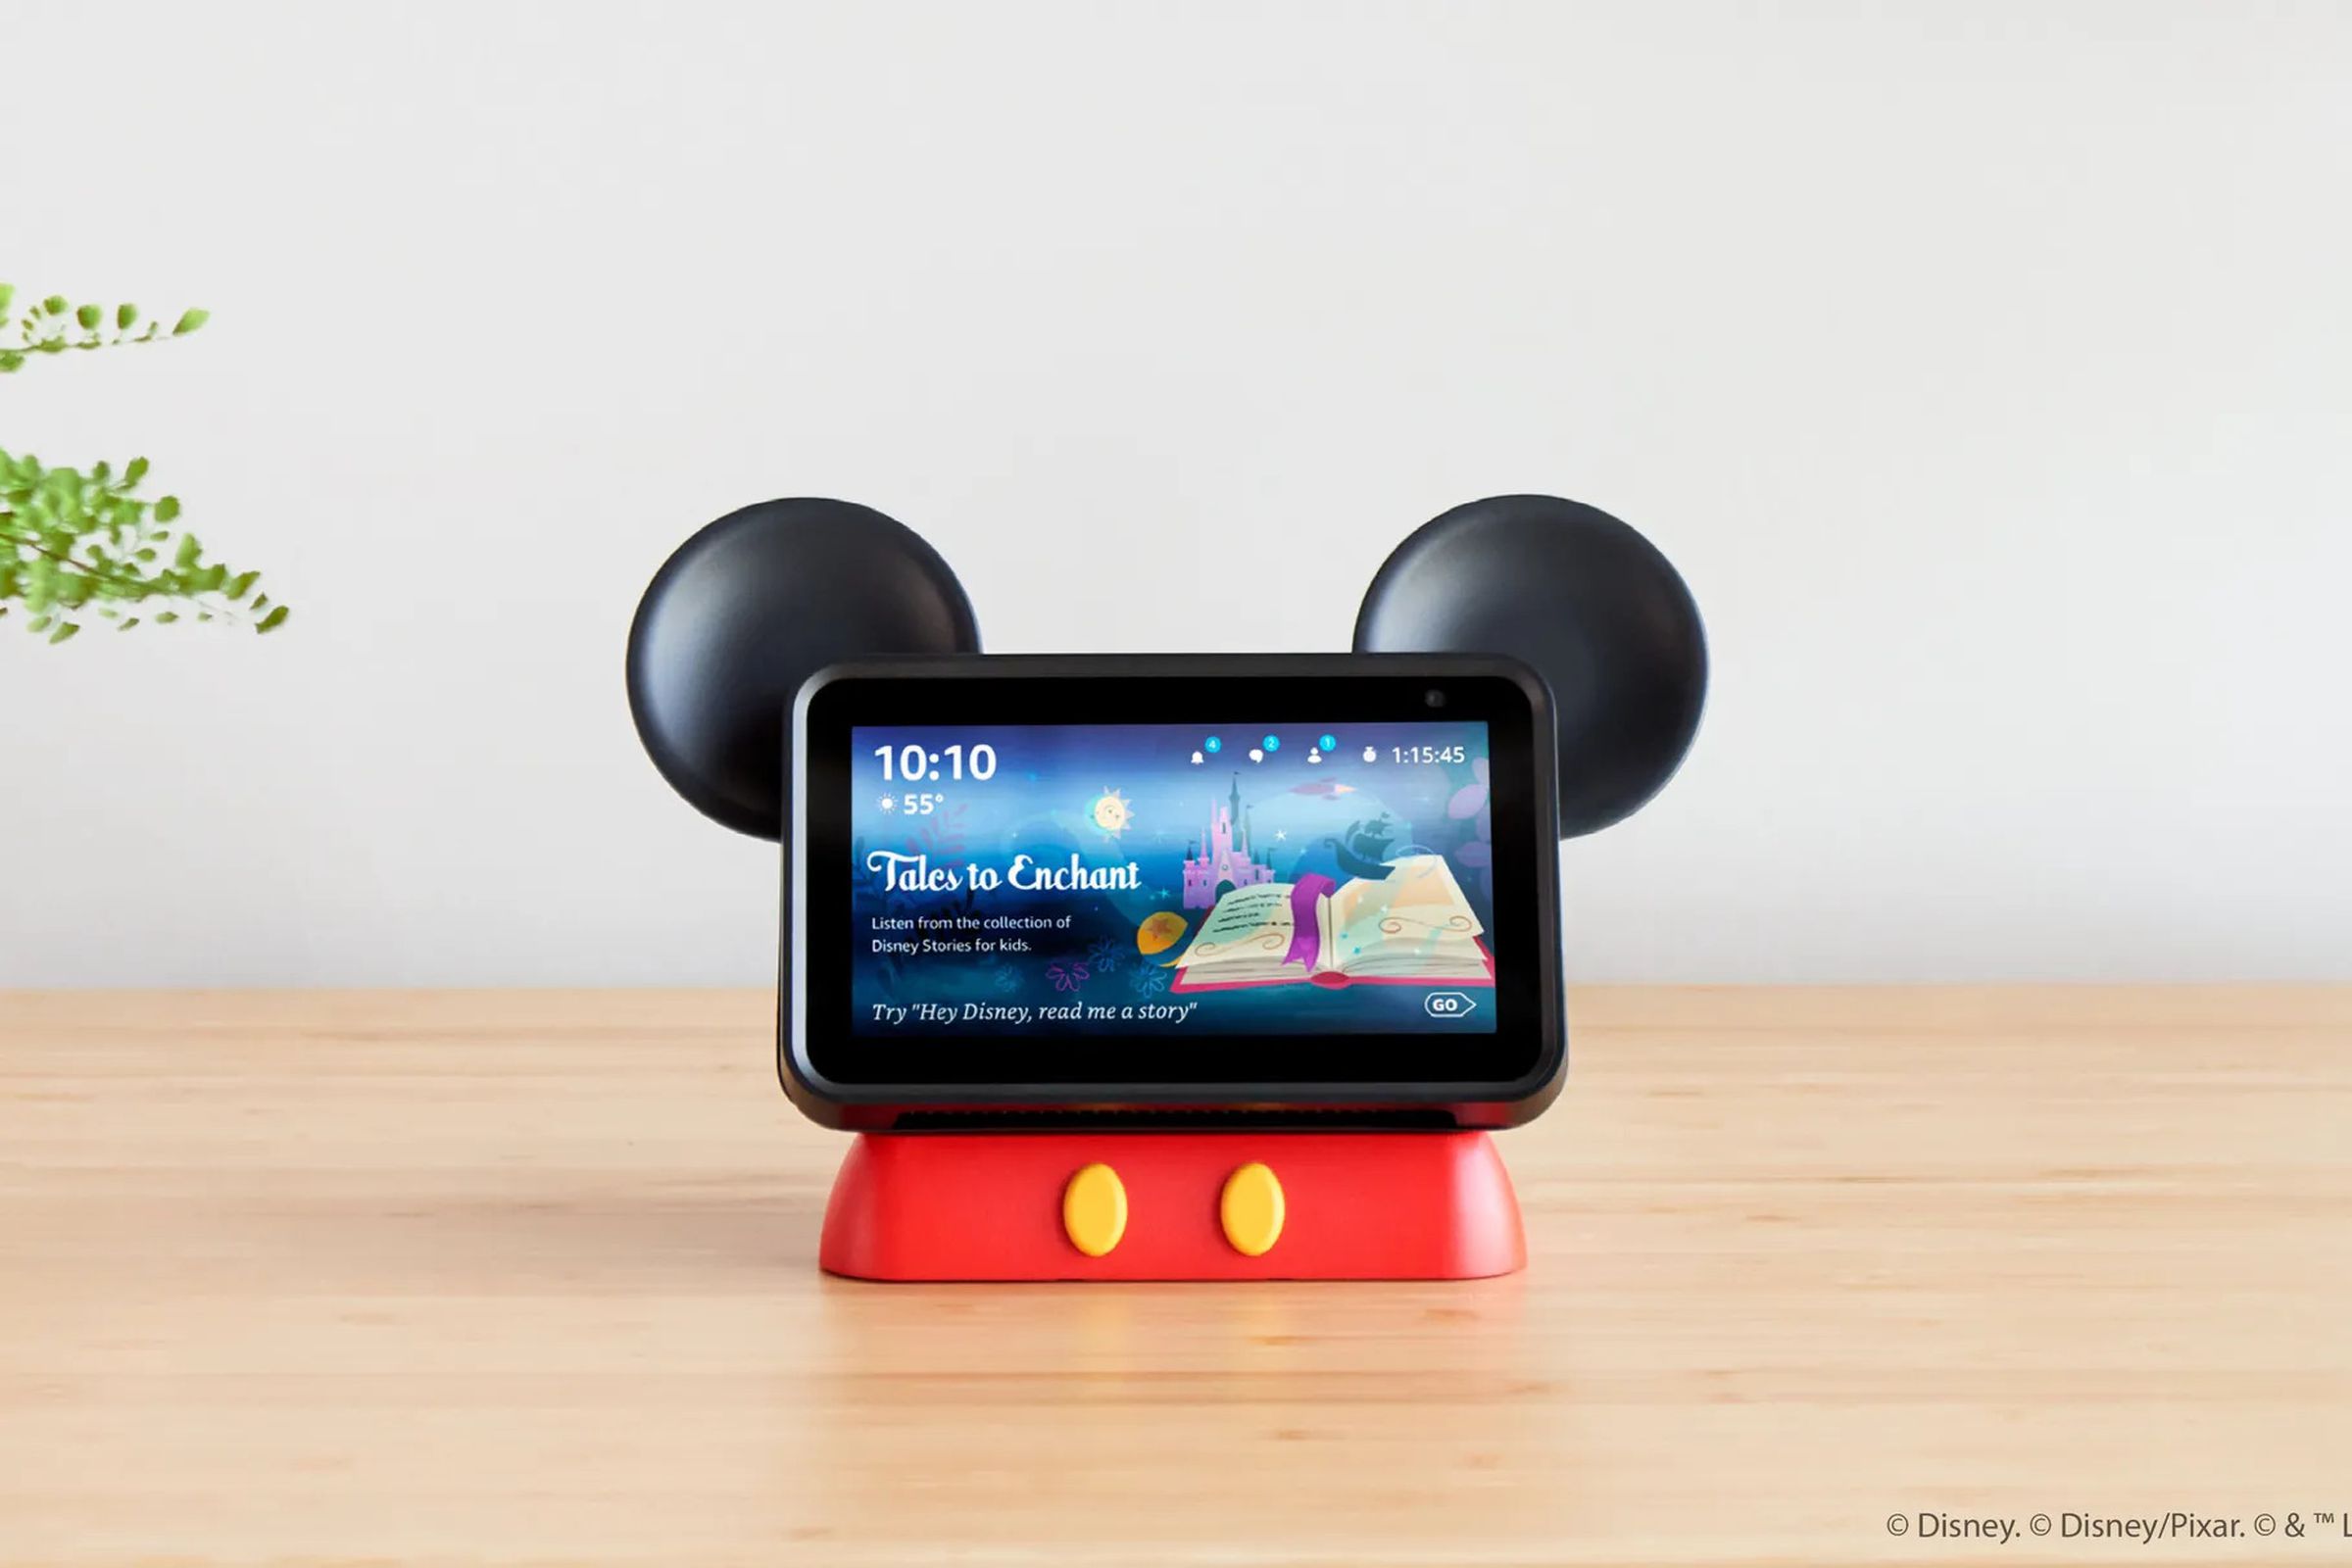 A “Hey Disney” custom voice assistant is due to arrive this year.